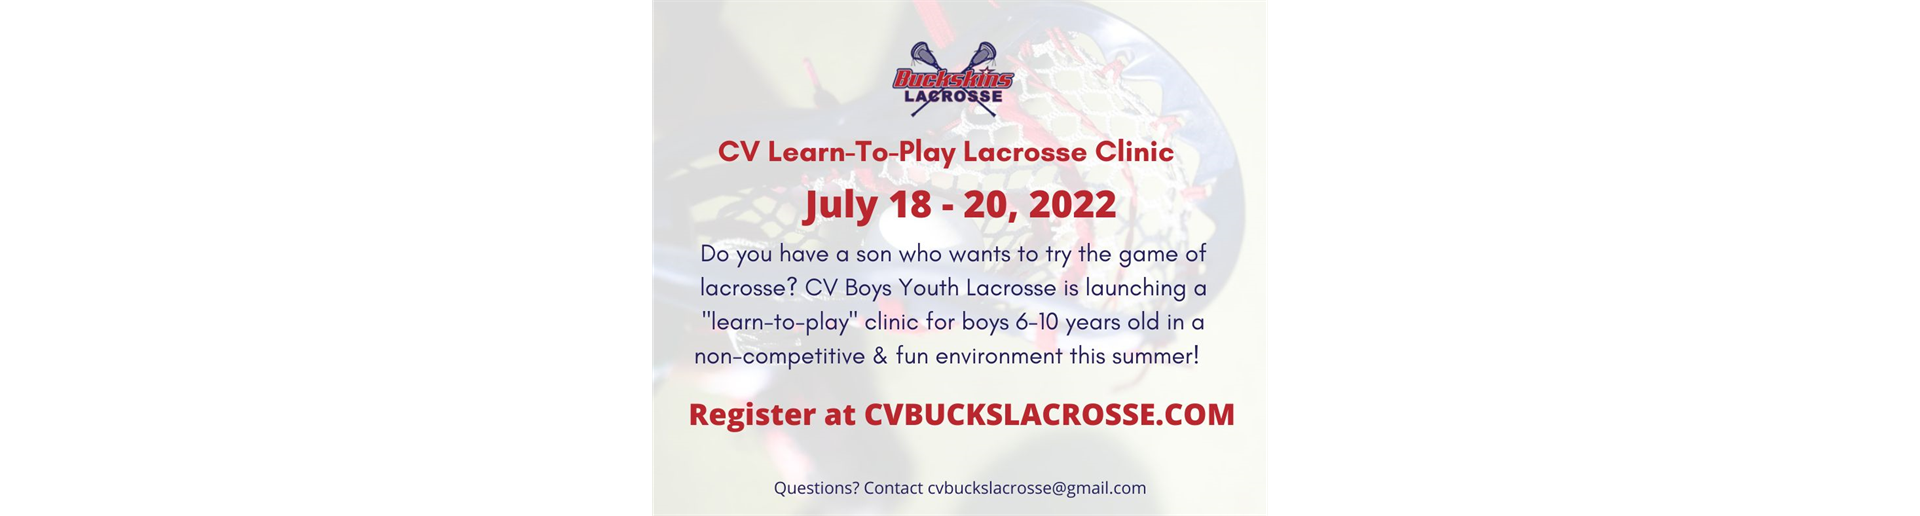 CV Learn To Play Lacrosse Clinic